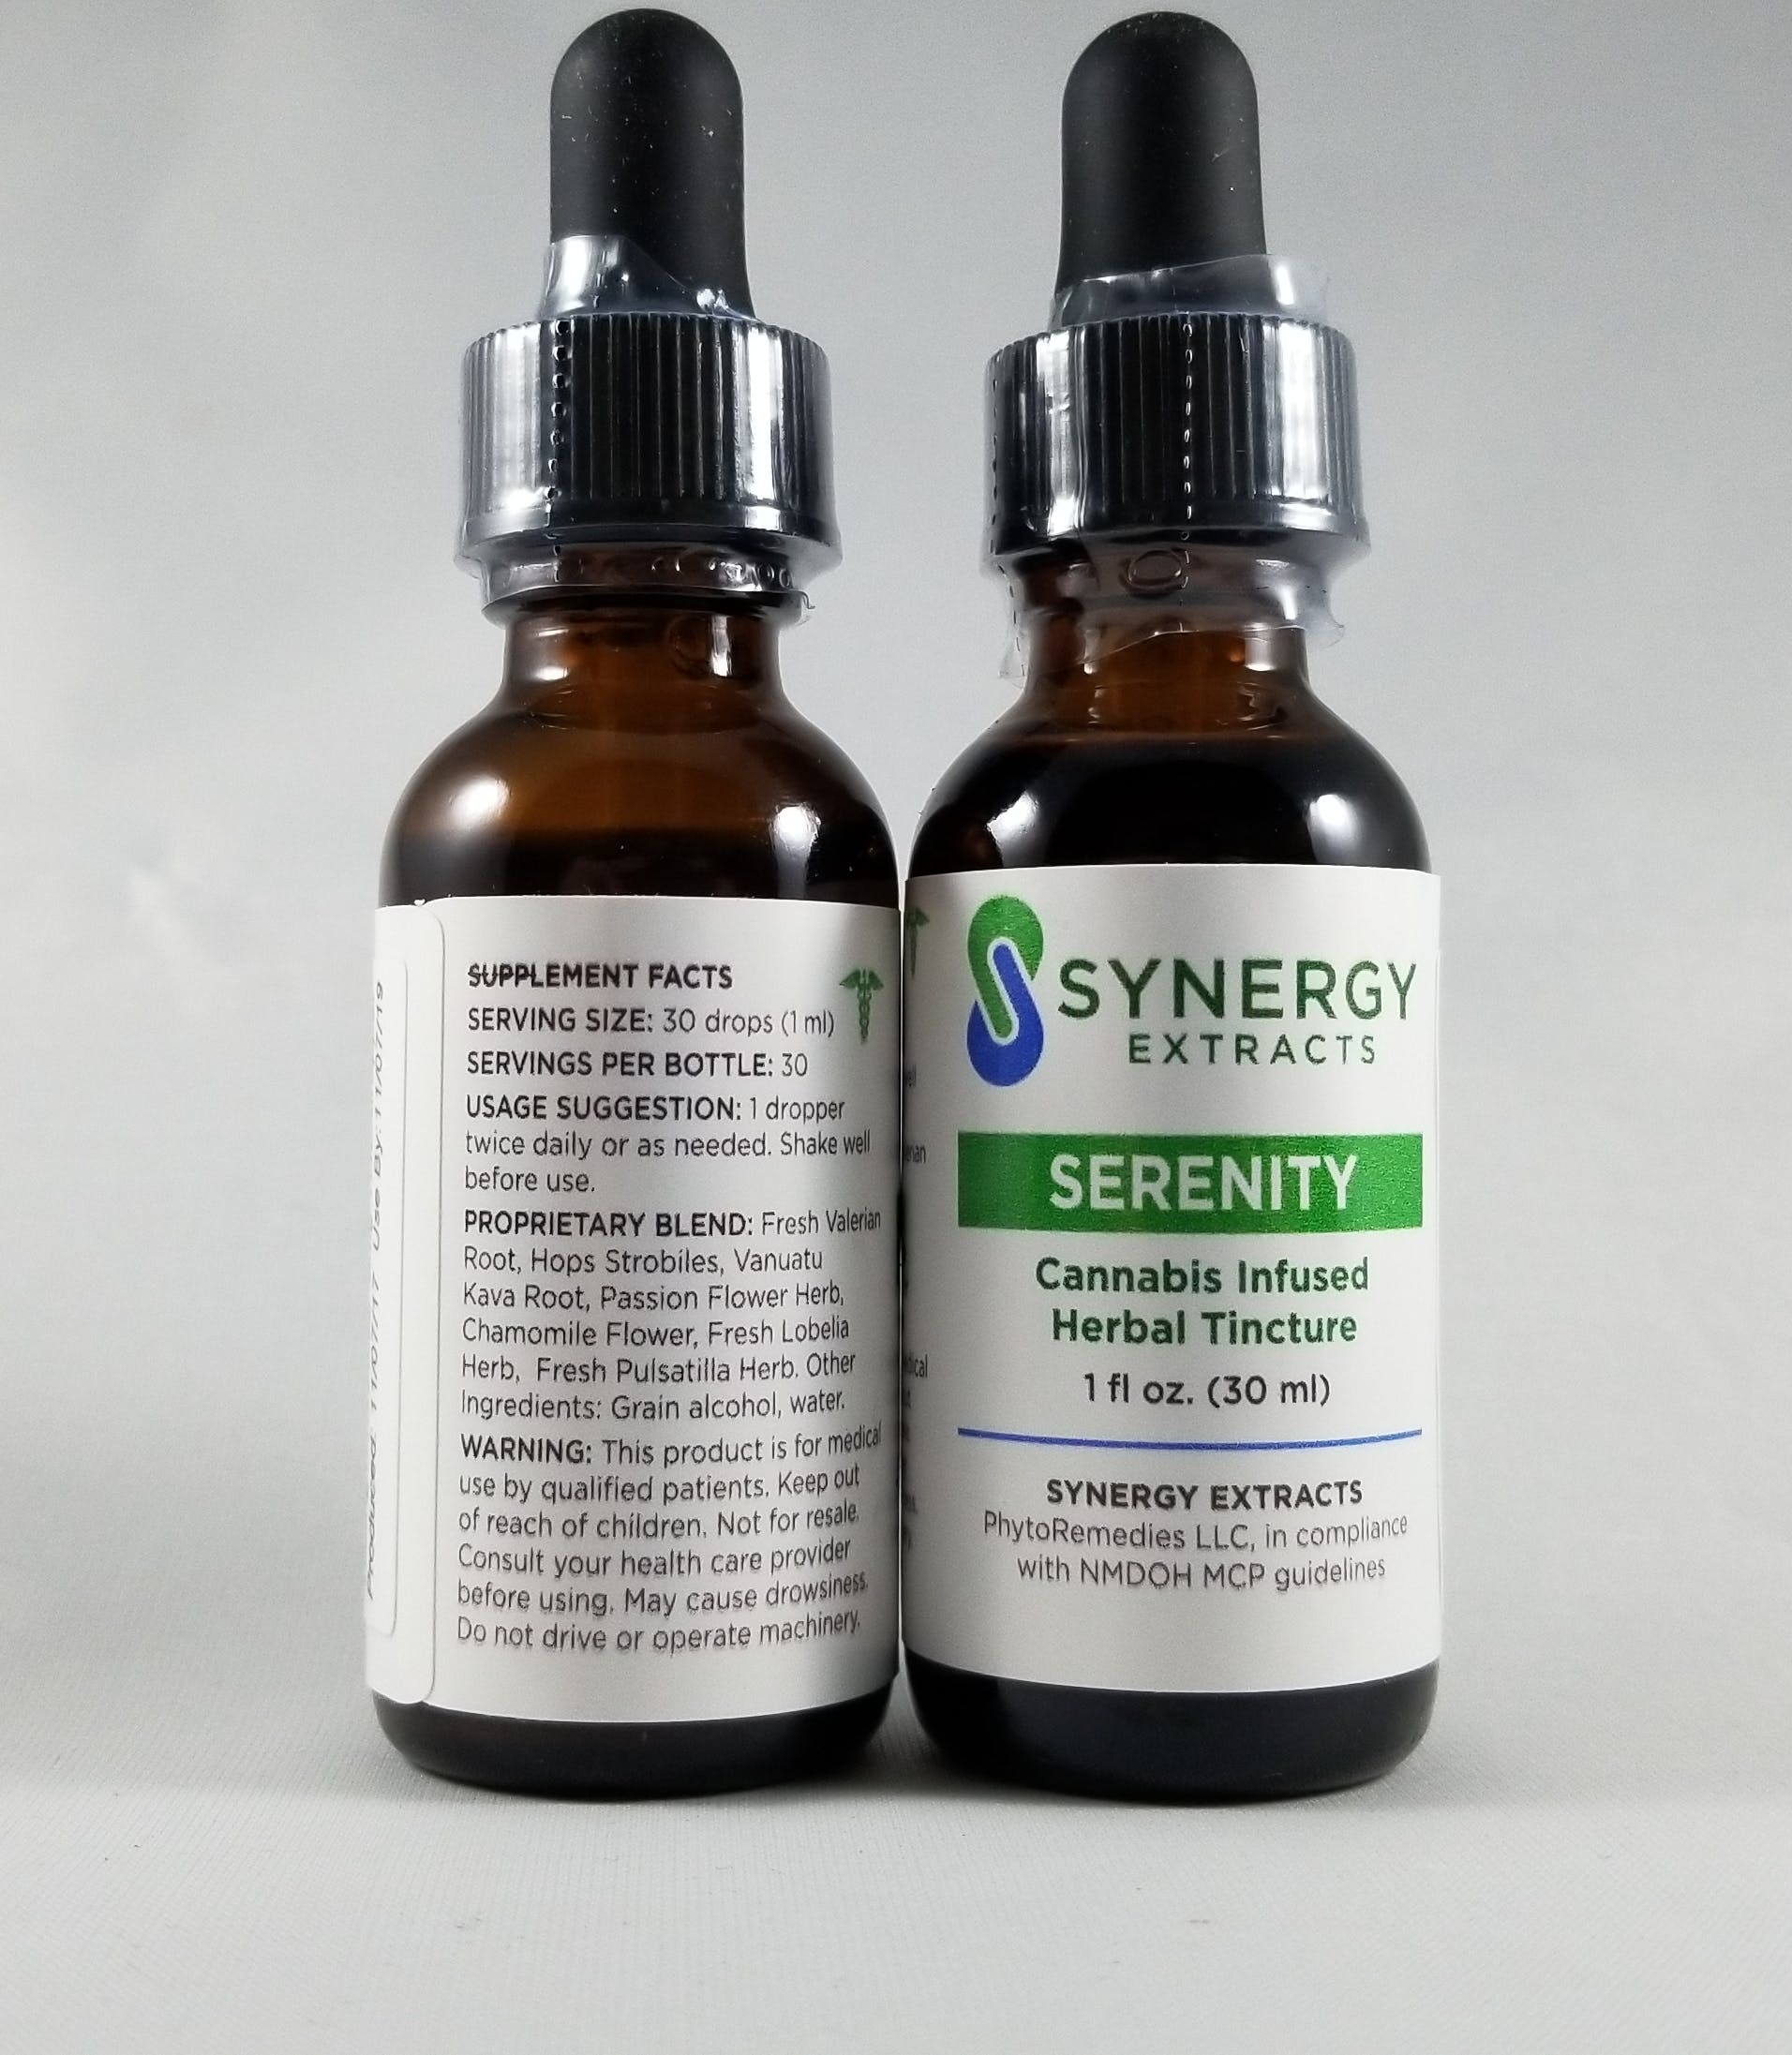 tincture-synergy-serenity-tincture-150mg-thc